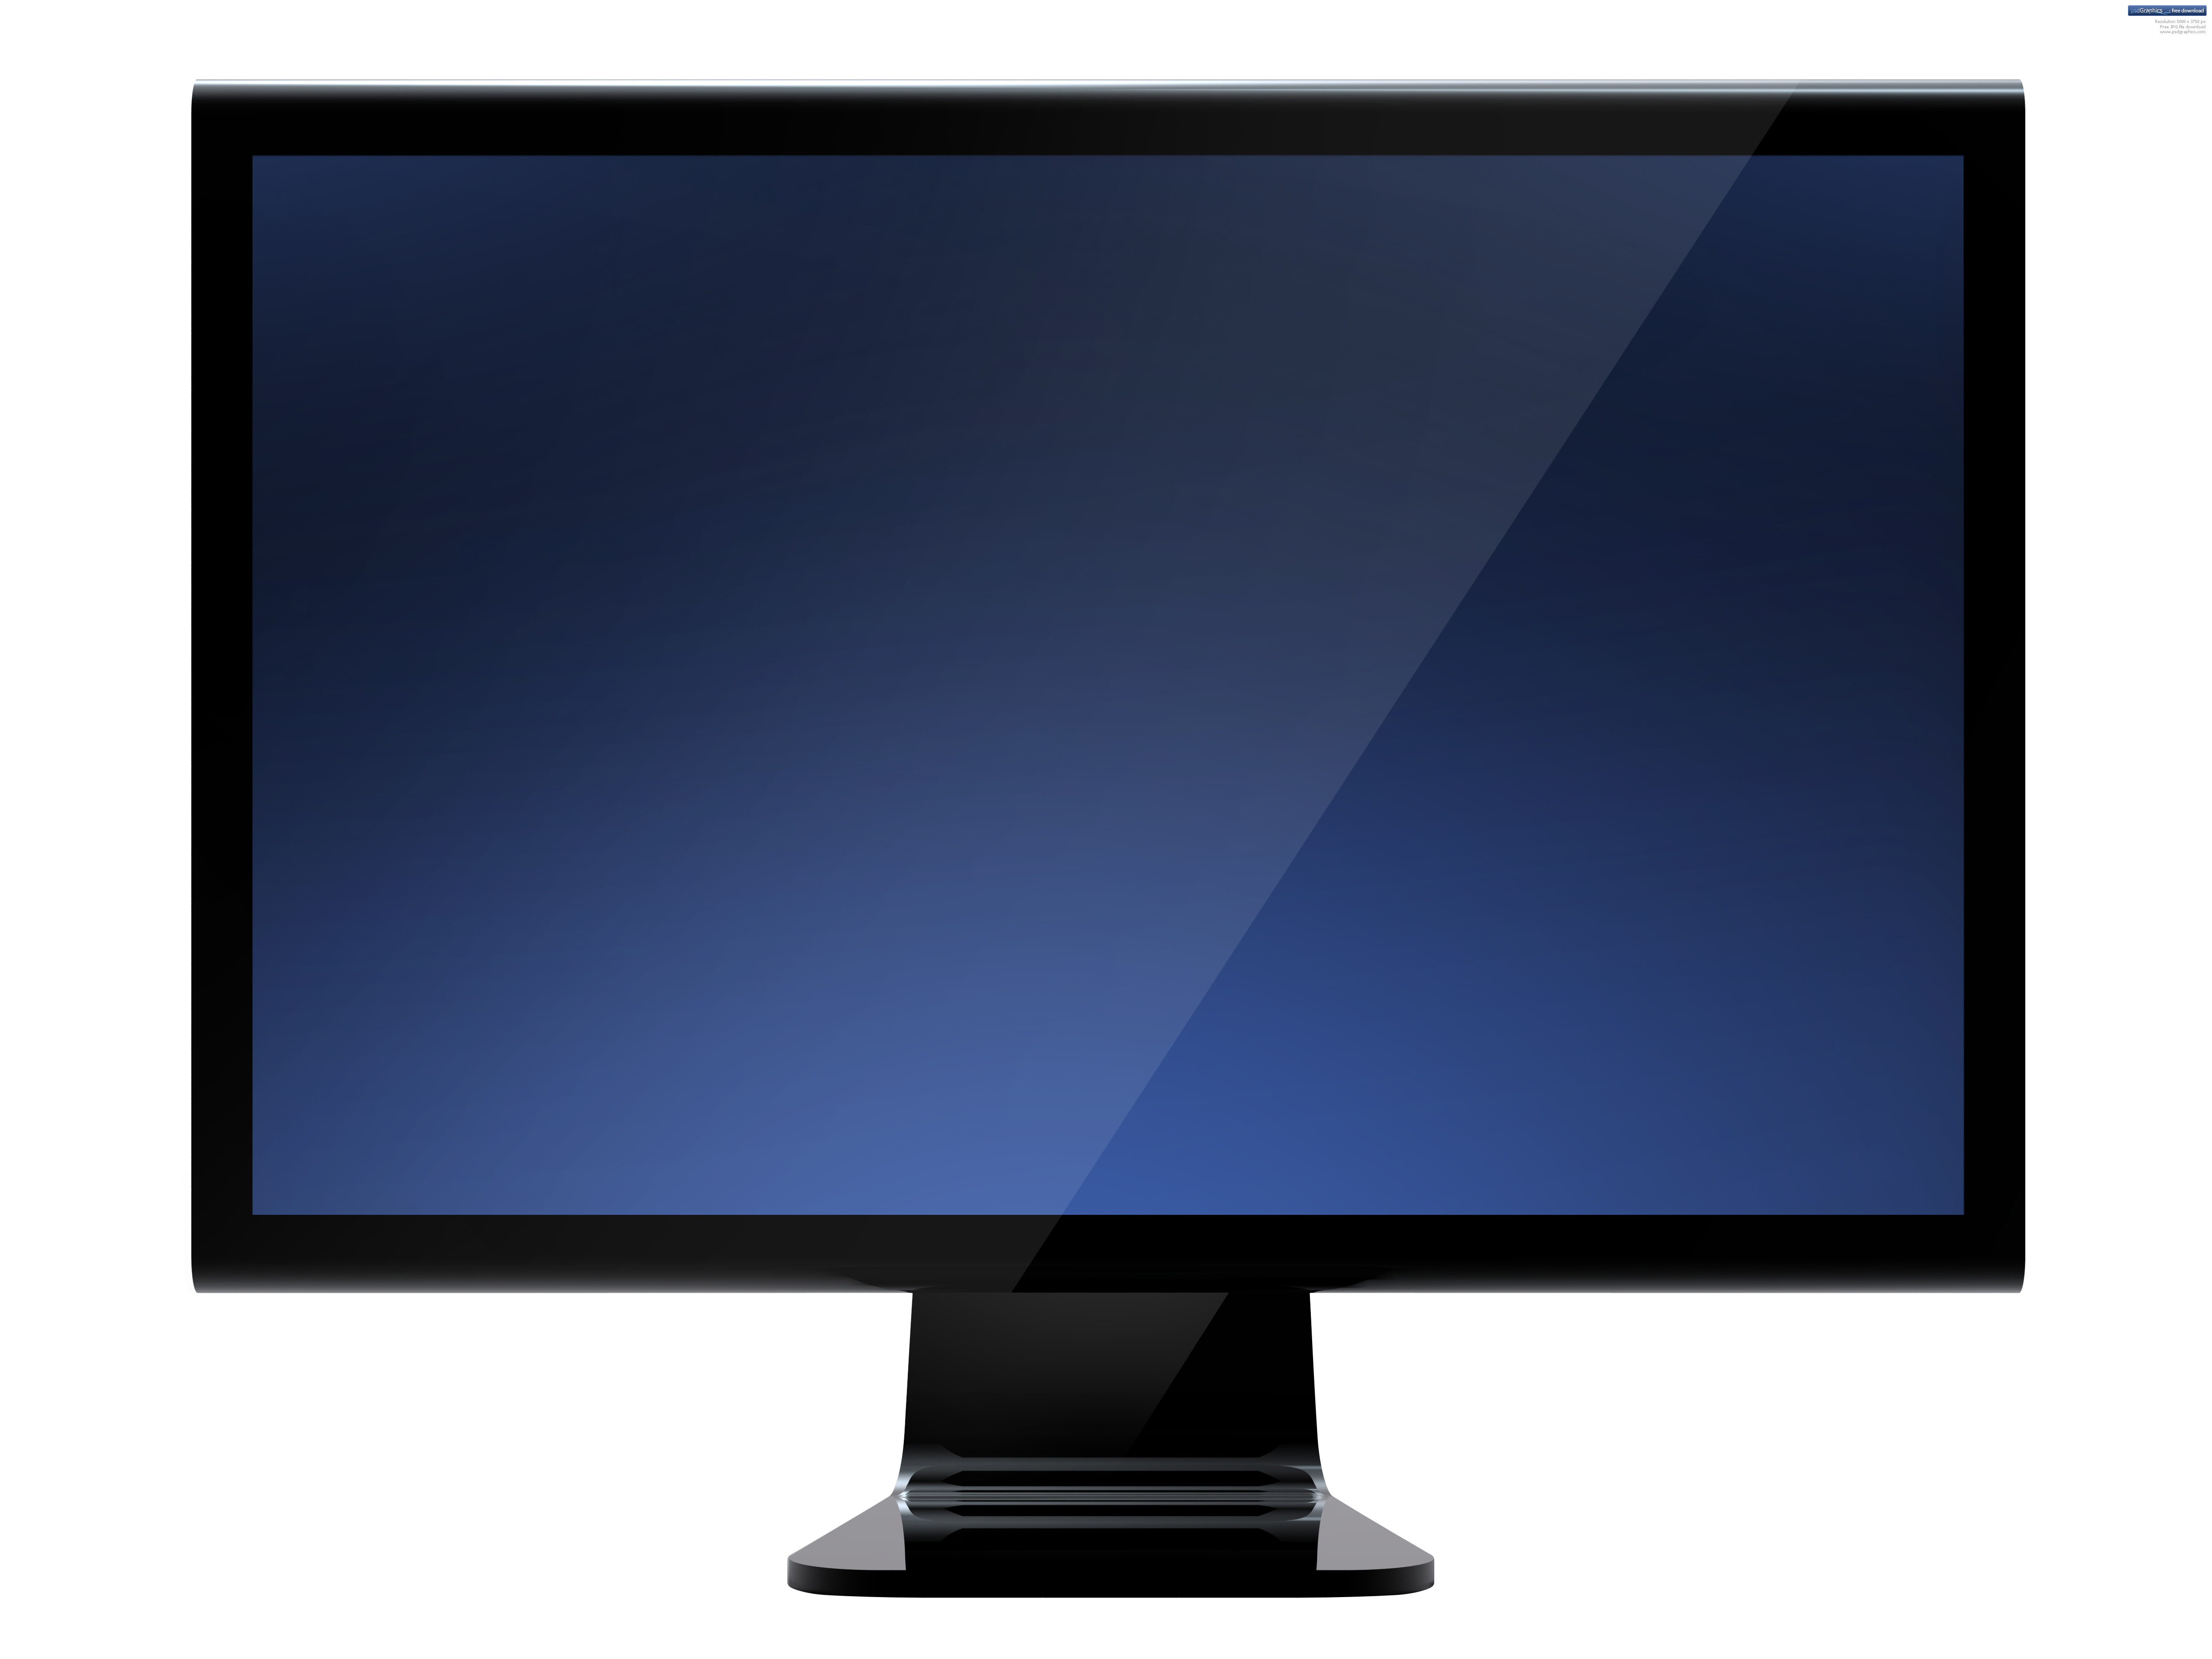 LCD Computer Monitor Screen Pictures